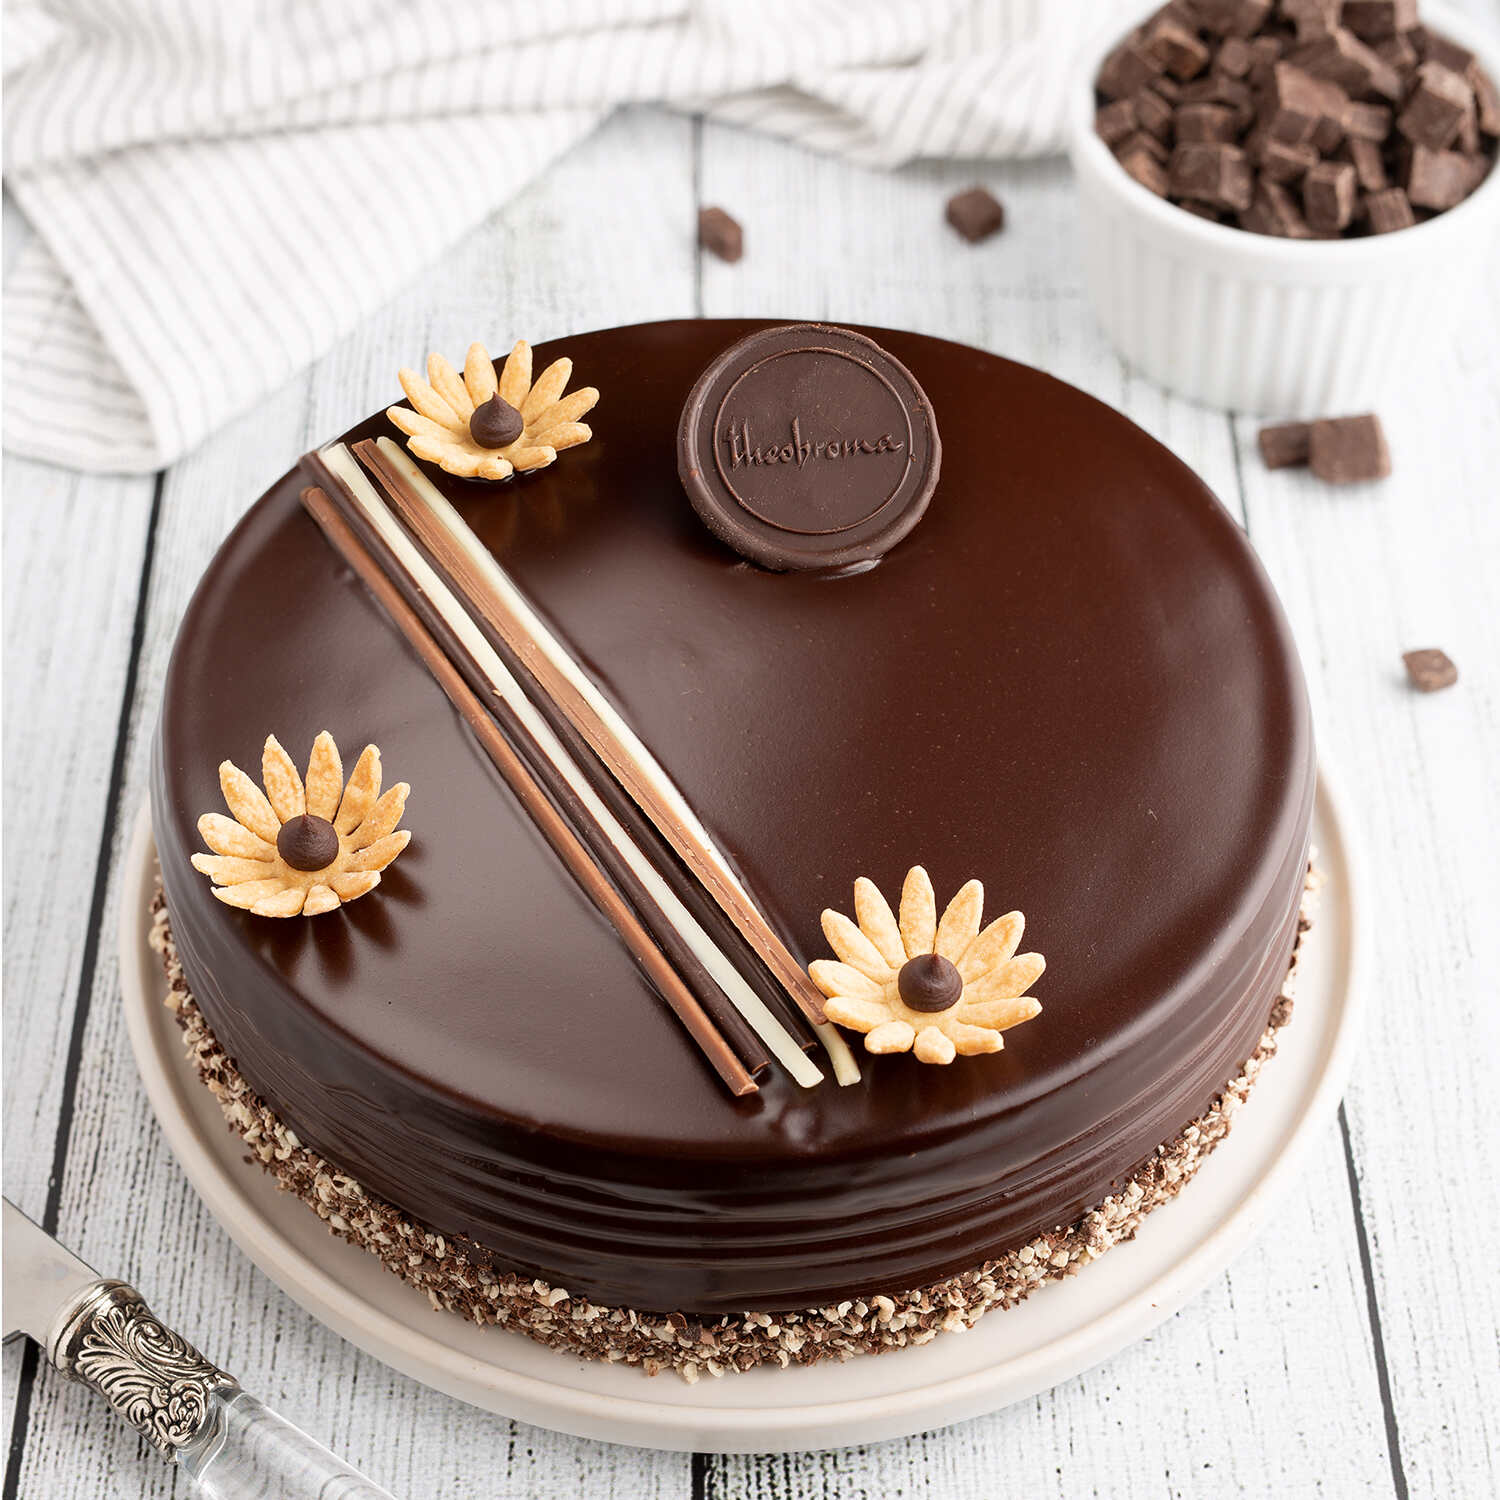 Order Eggless Chocoholic Cake Online at Best Prices in India | Theobroma